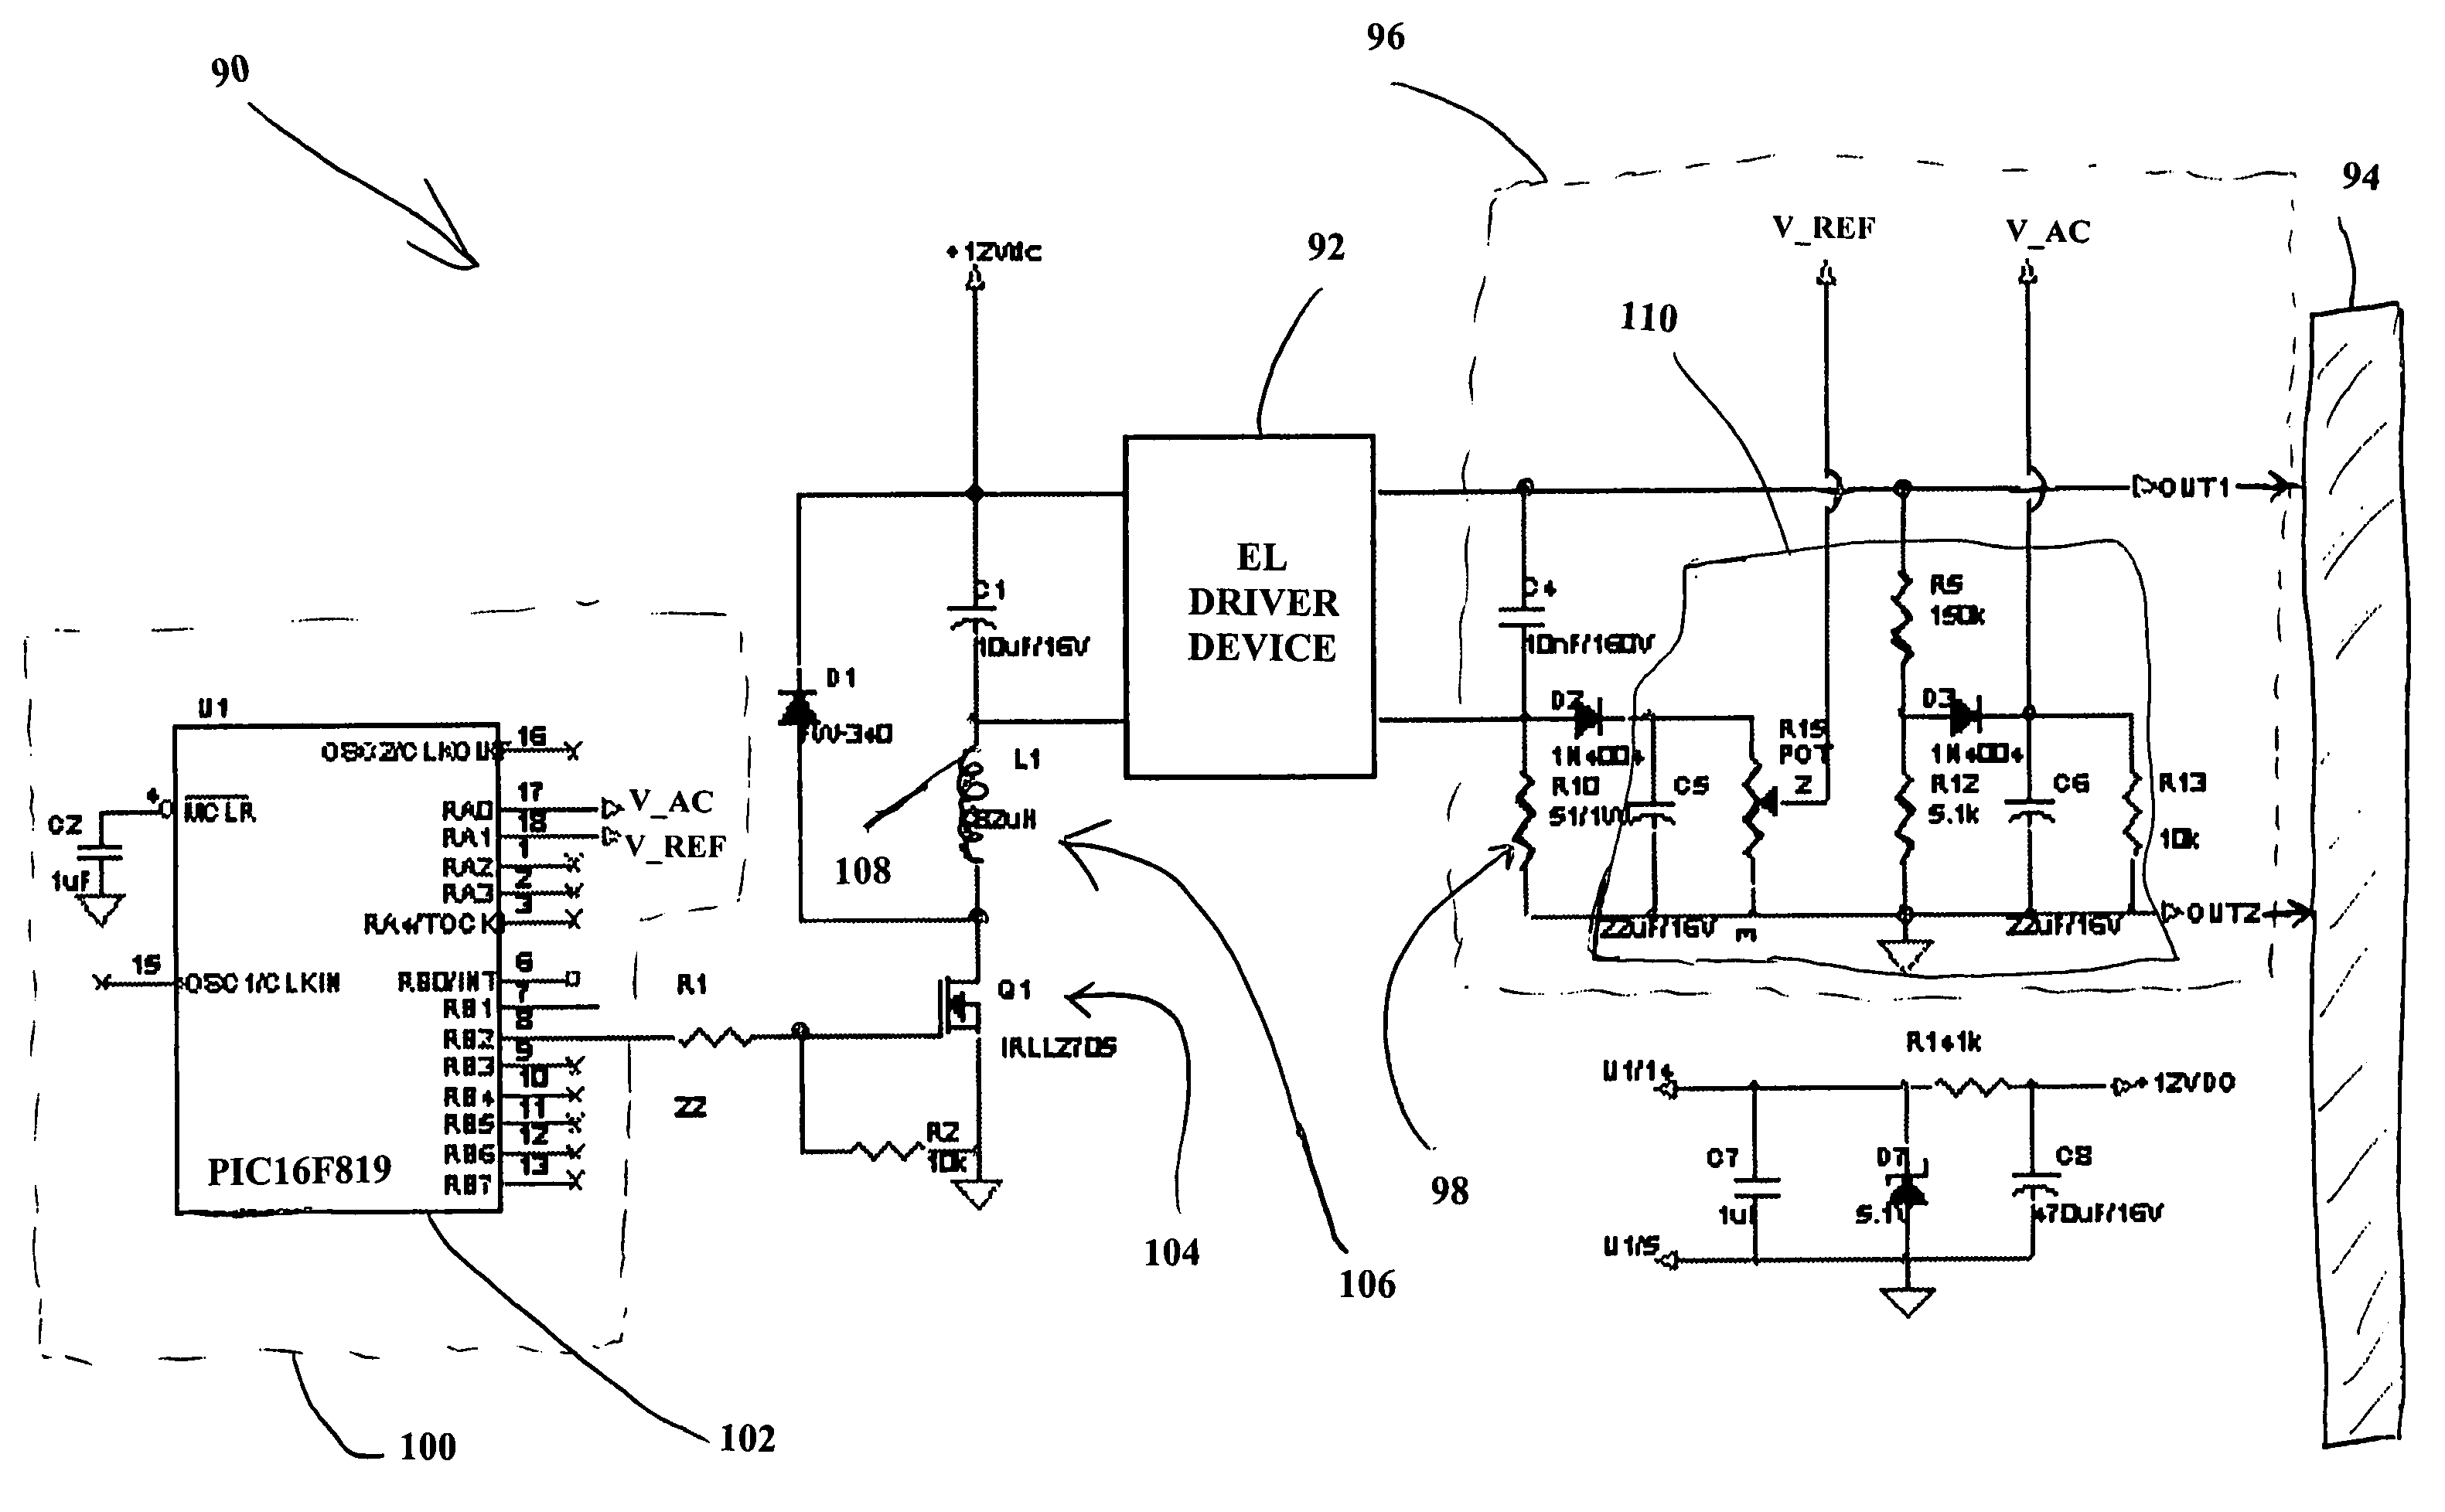 Electroluminescent device including a programmable pattern generator